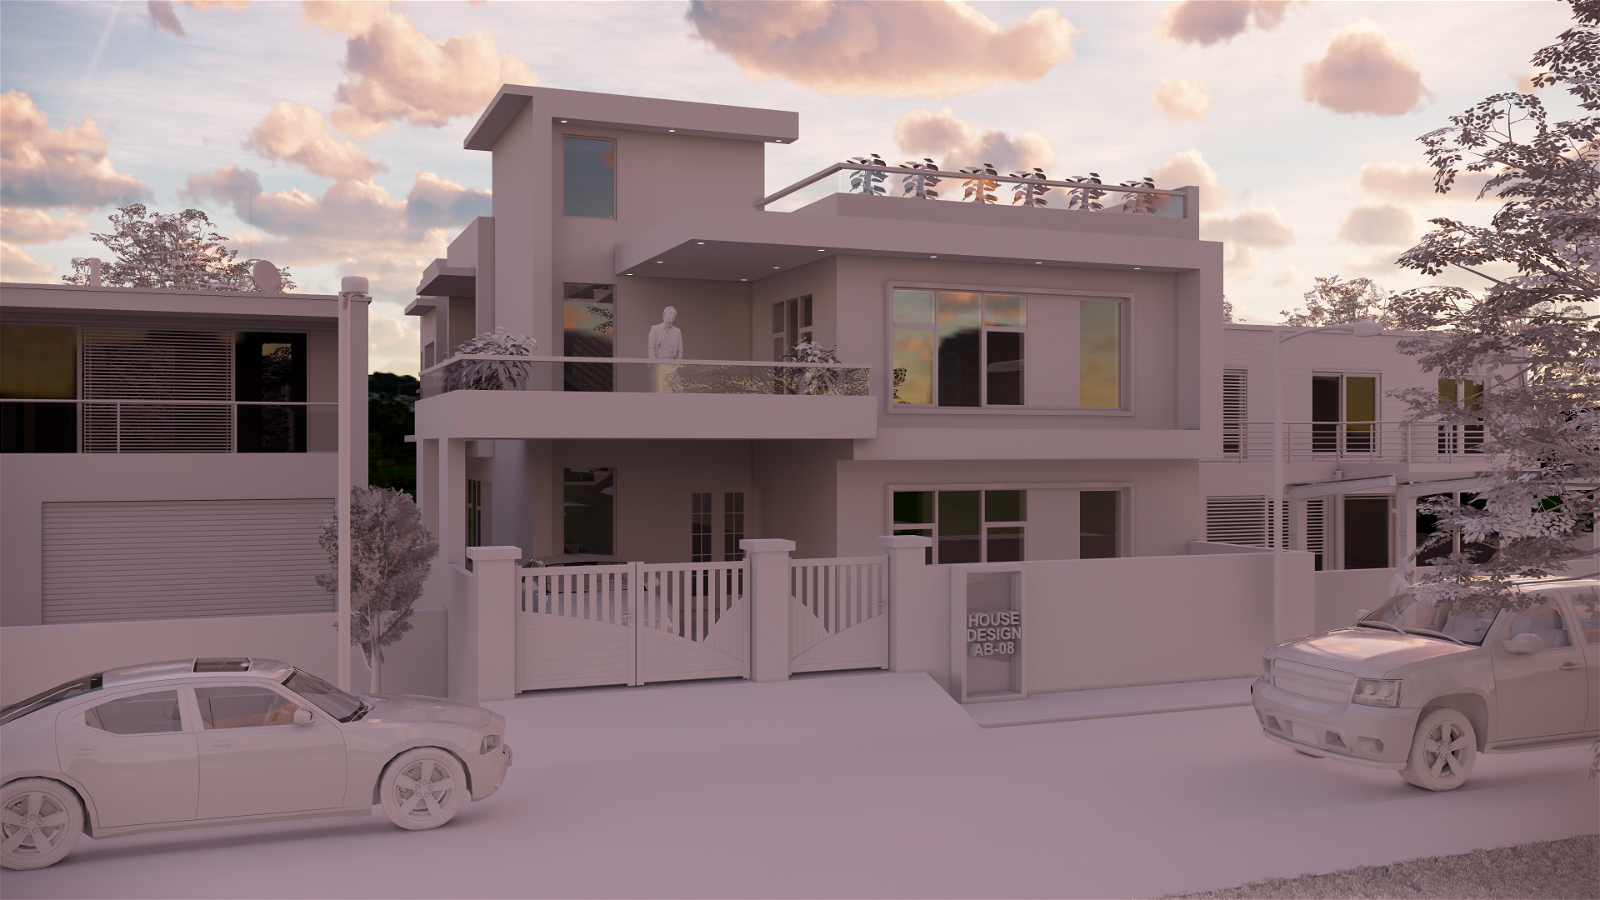 Wonderful house design elevation Revit drawing file is given here